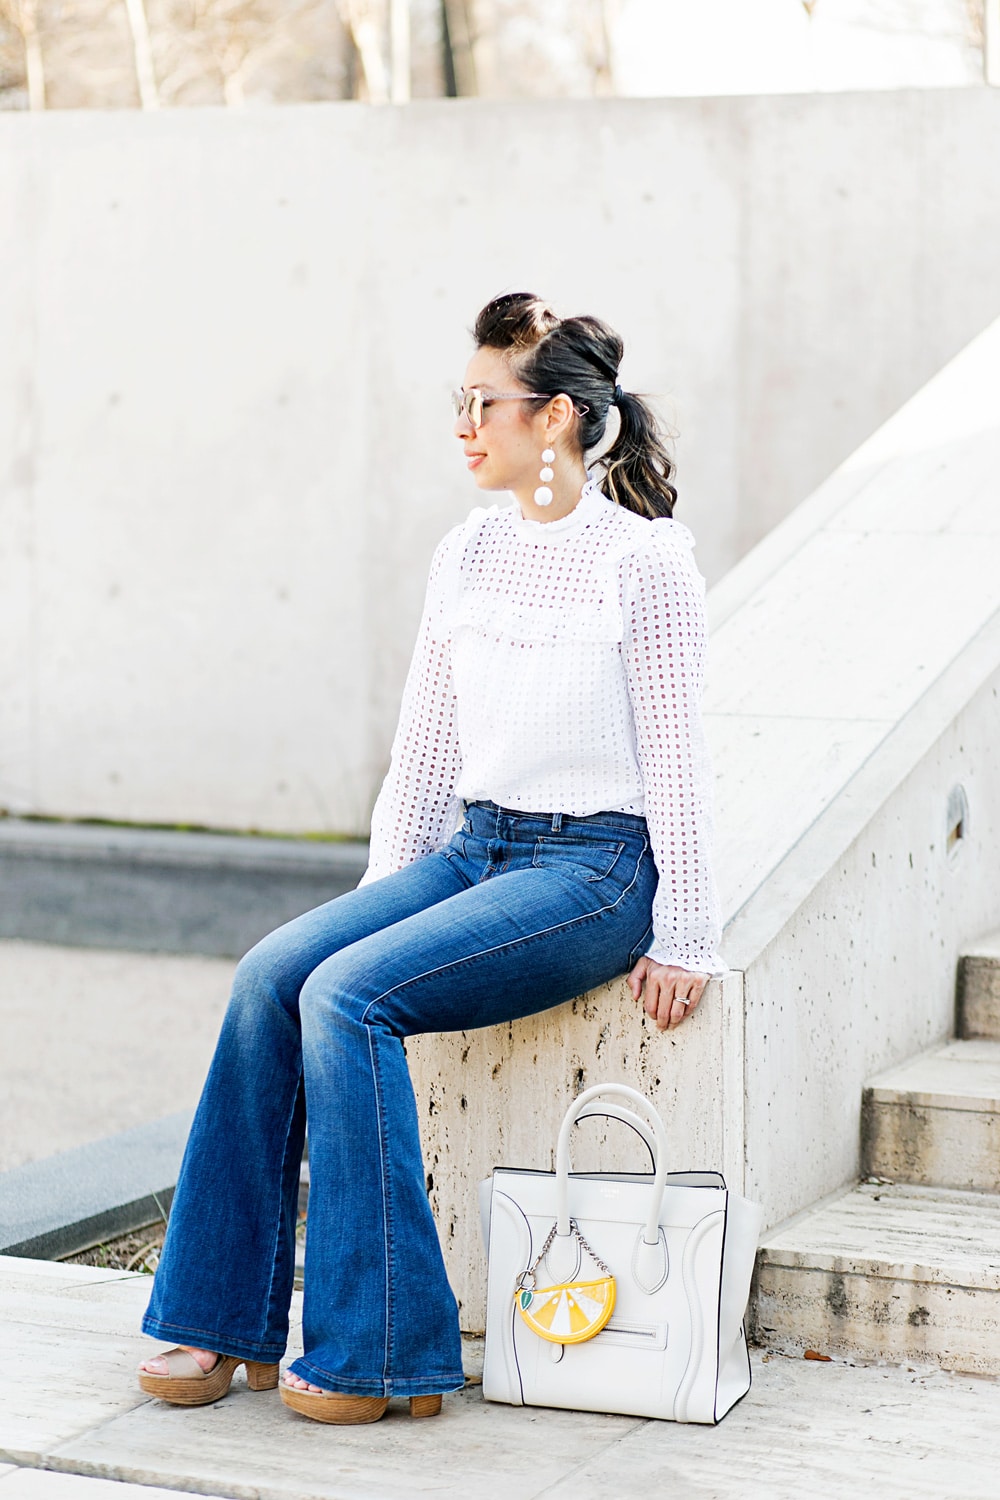 who what wear x target eyelet top w/ baublebar crispin drop earrings and jbrand flare jeans, celine white luggage tote, how to make a cheap top look expensive